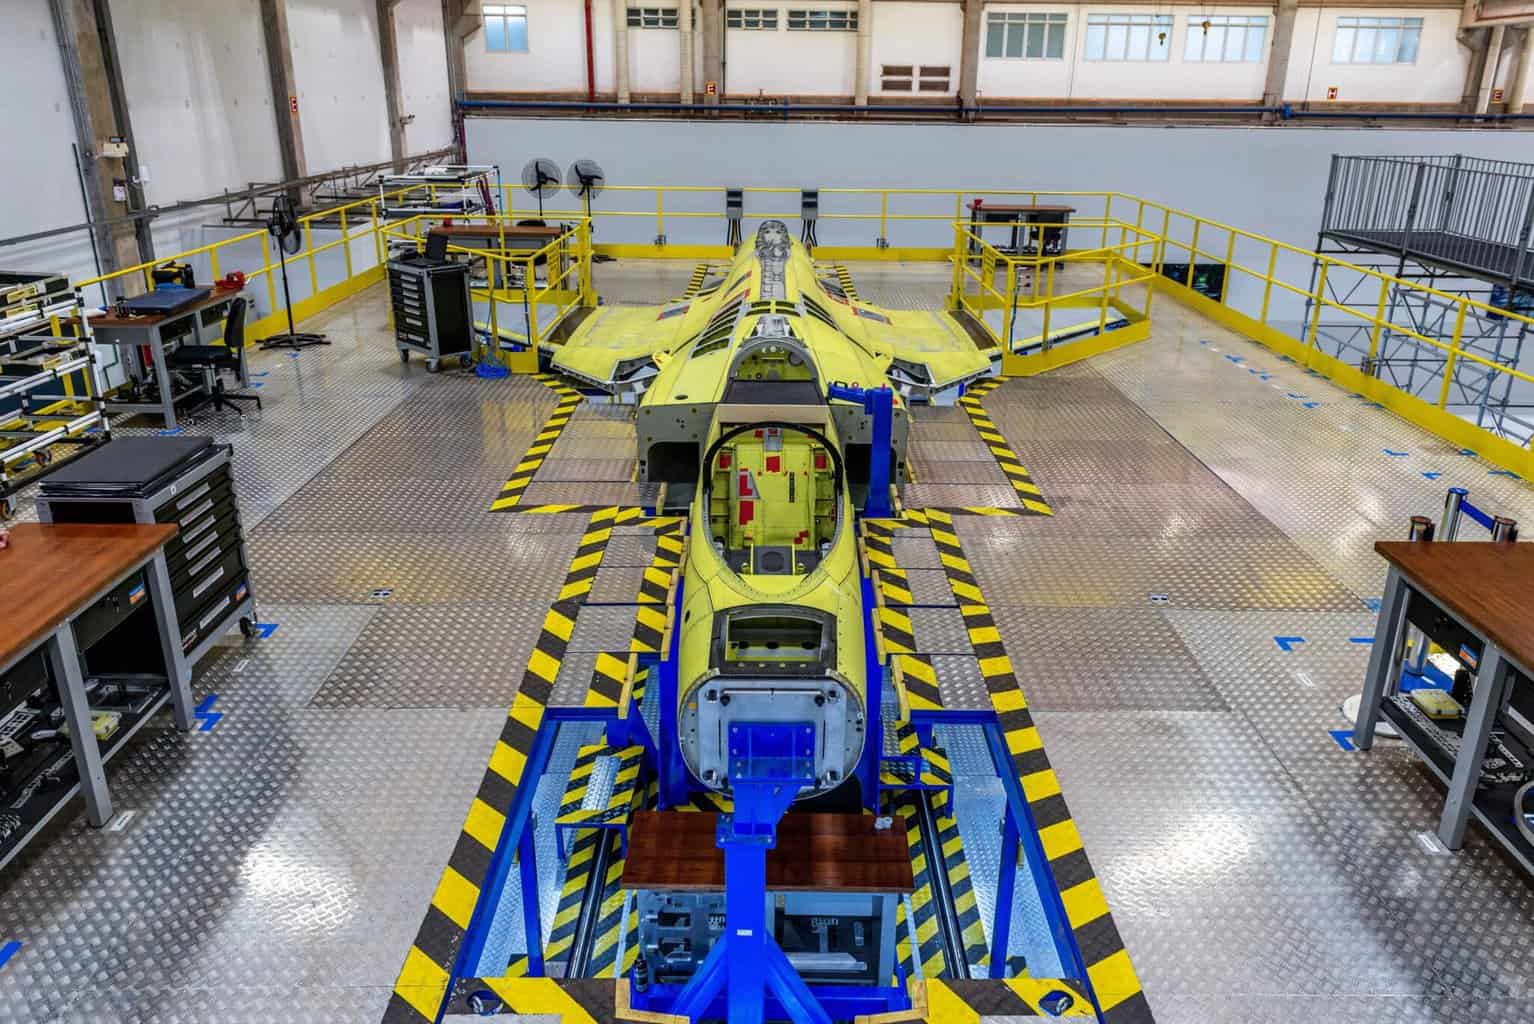 Gripen E production started in Brazil at Embraer production line in Gavião peixoto